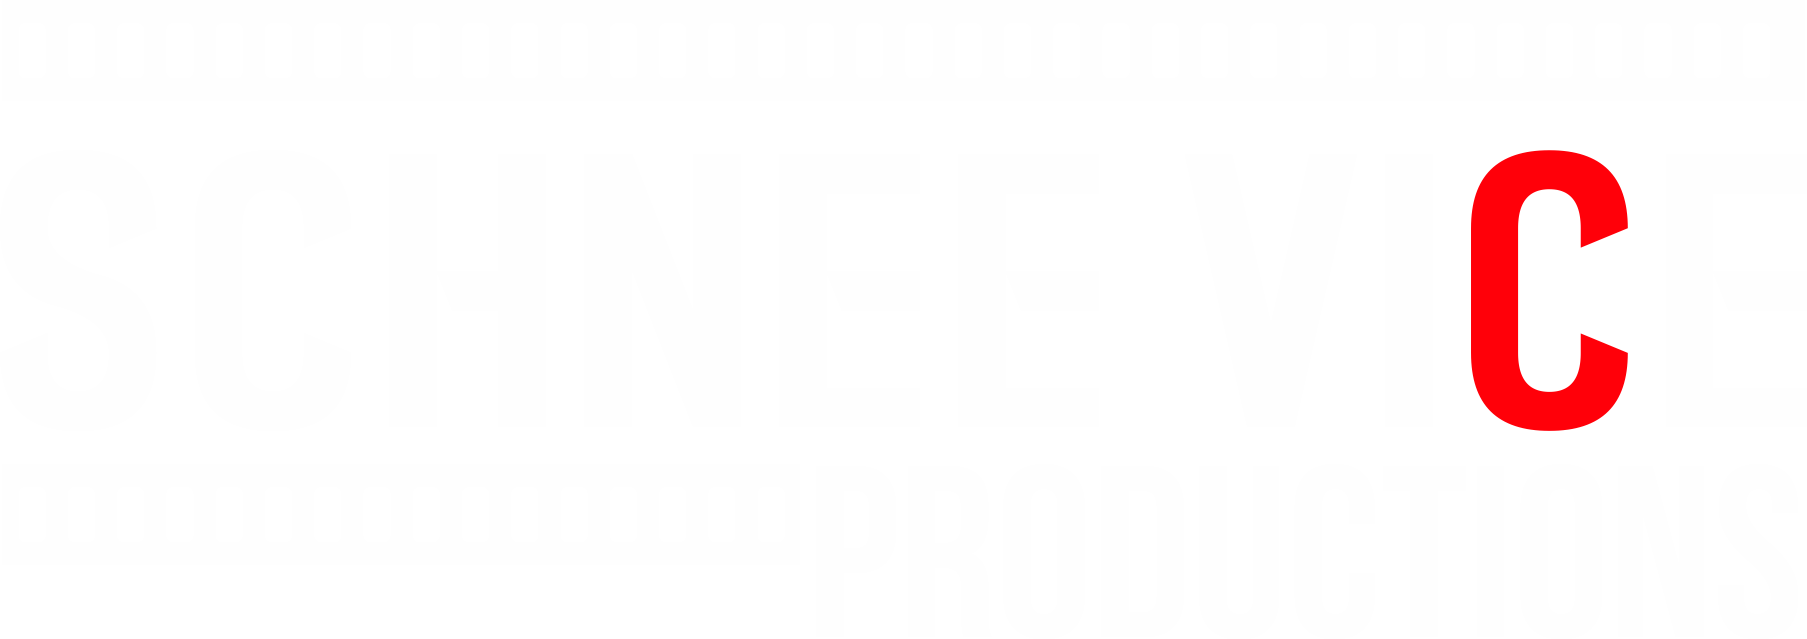 Schnee Vice Productions